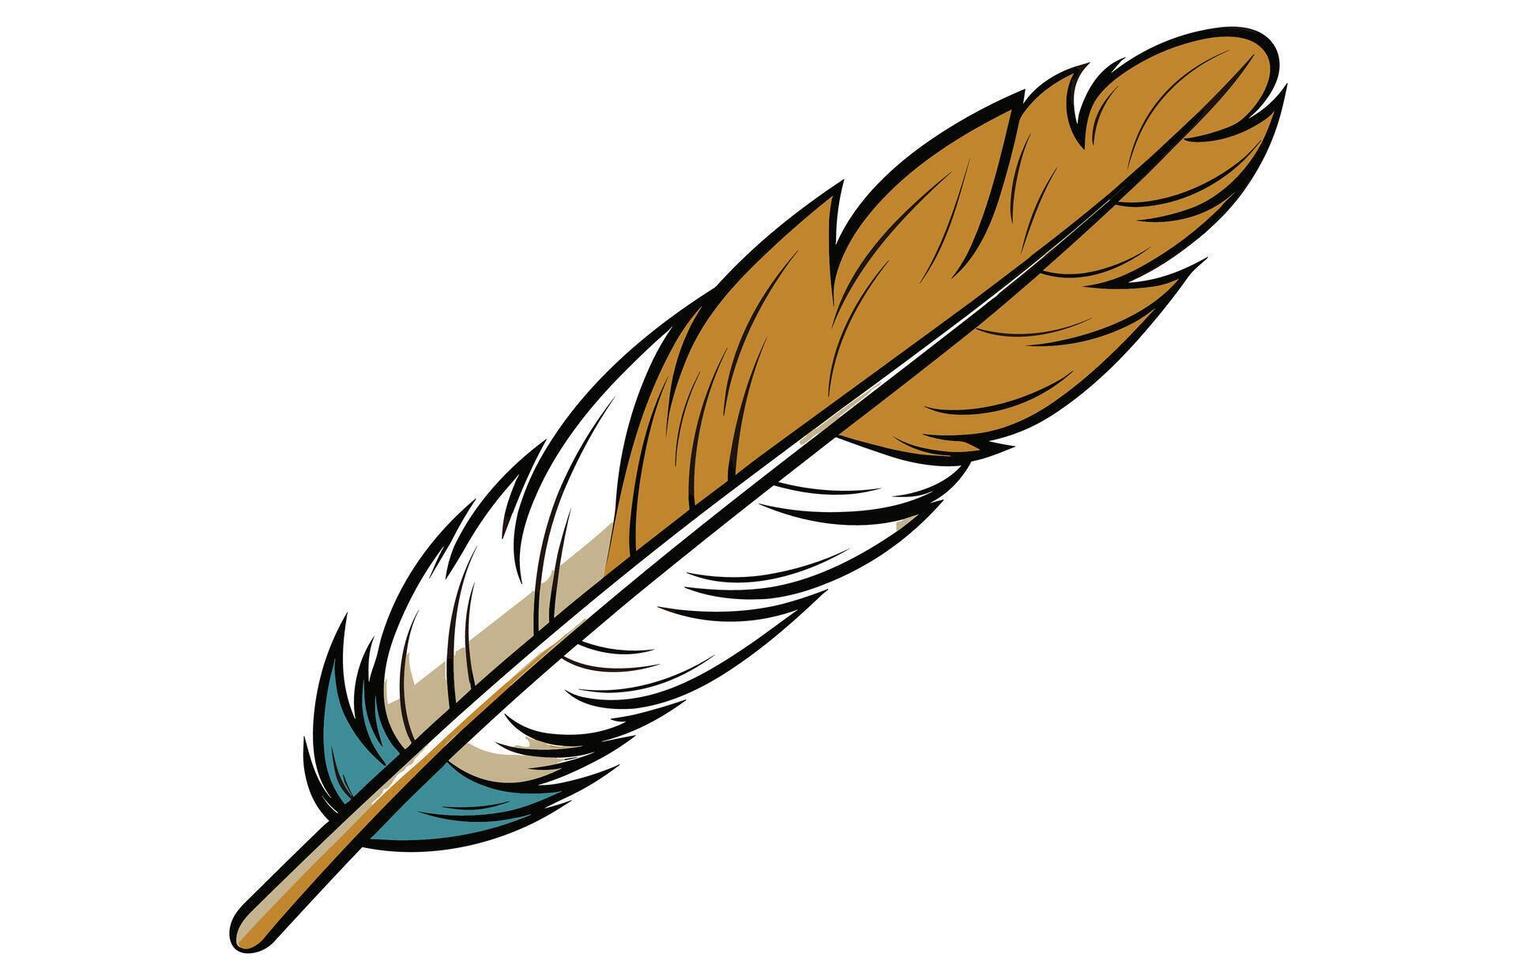 Colorful Feather Vector Illustration, Vector of a Bird Feather